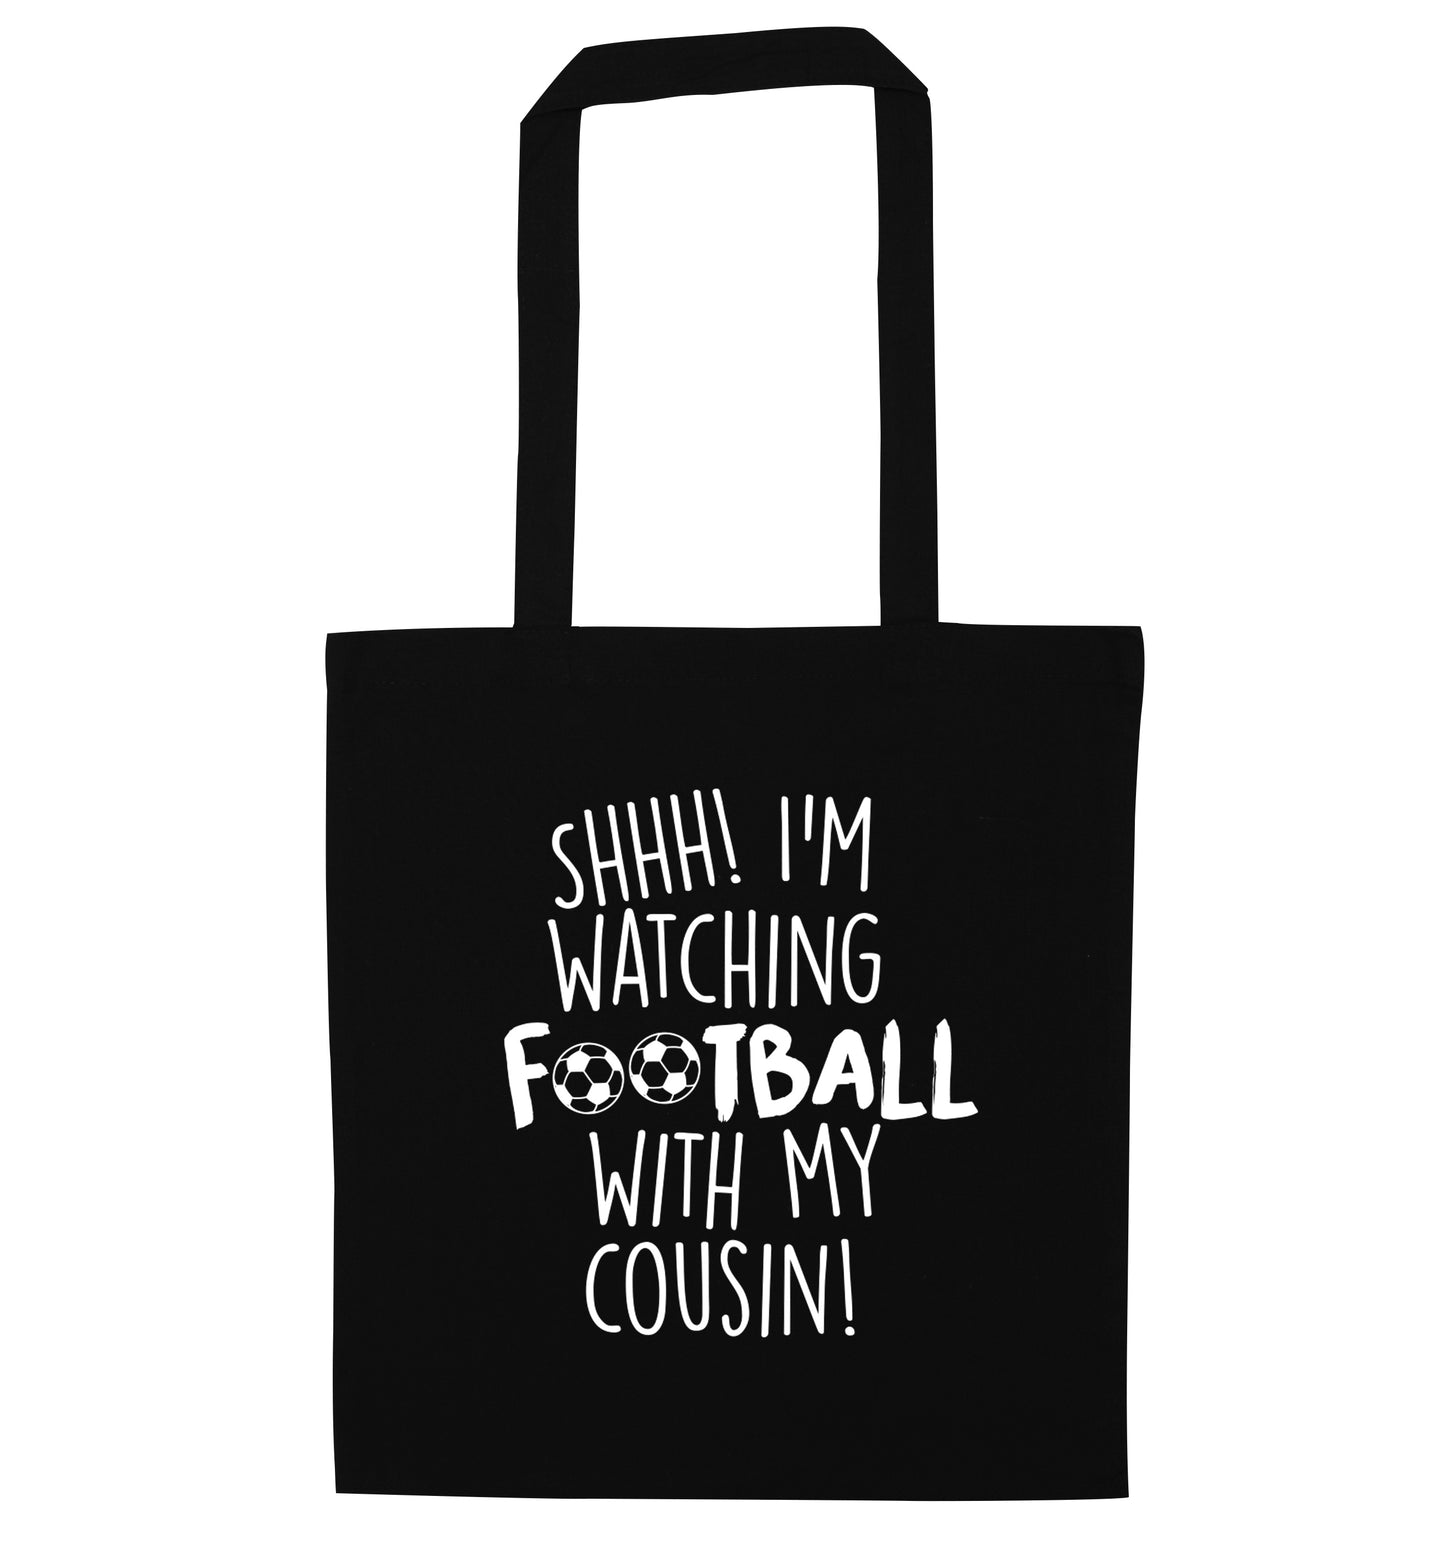 Shhh I'm watching football with my cousin black tote bag